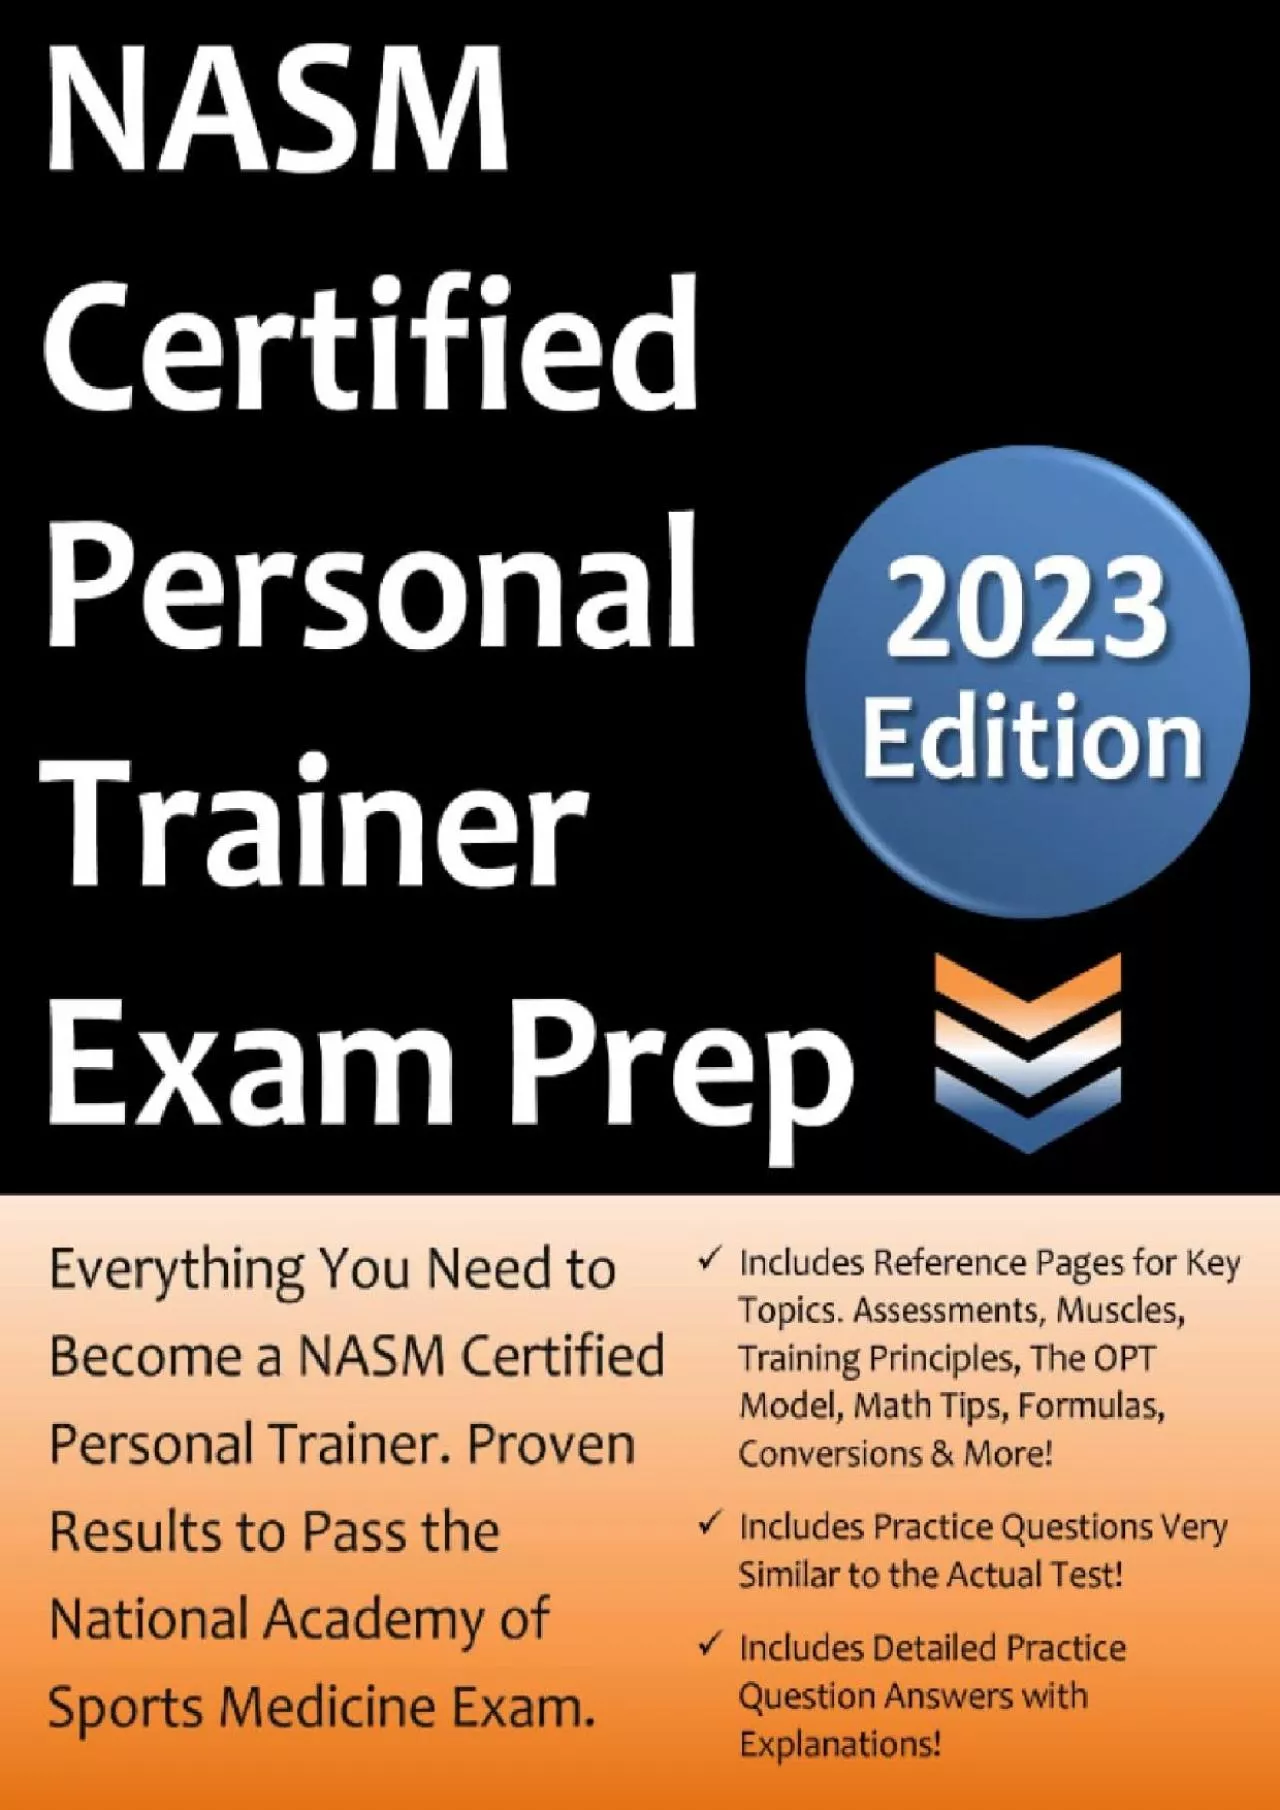 [READ] NASM Certified Personal Trainer Exam Prep: Study Guide that highlights the information